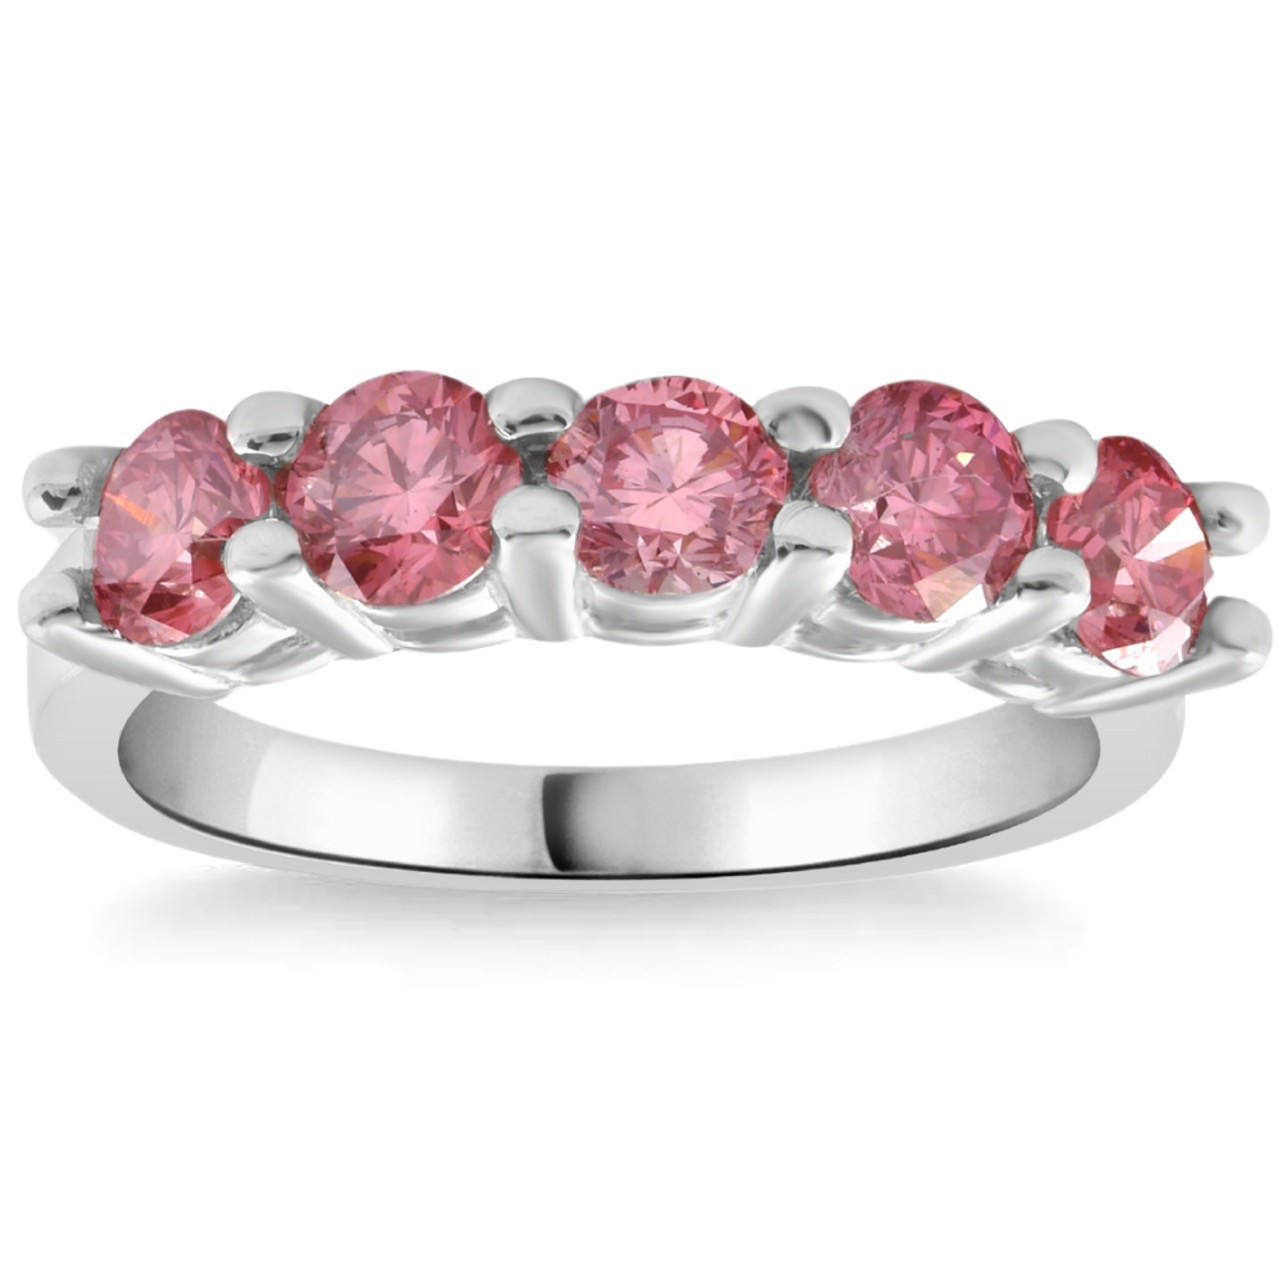 Investing In Pink Diamonds For Valentine's Day